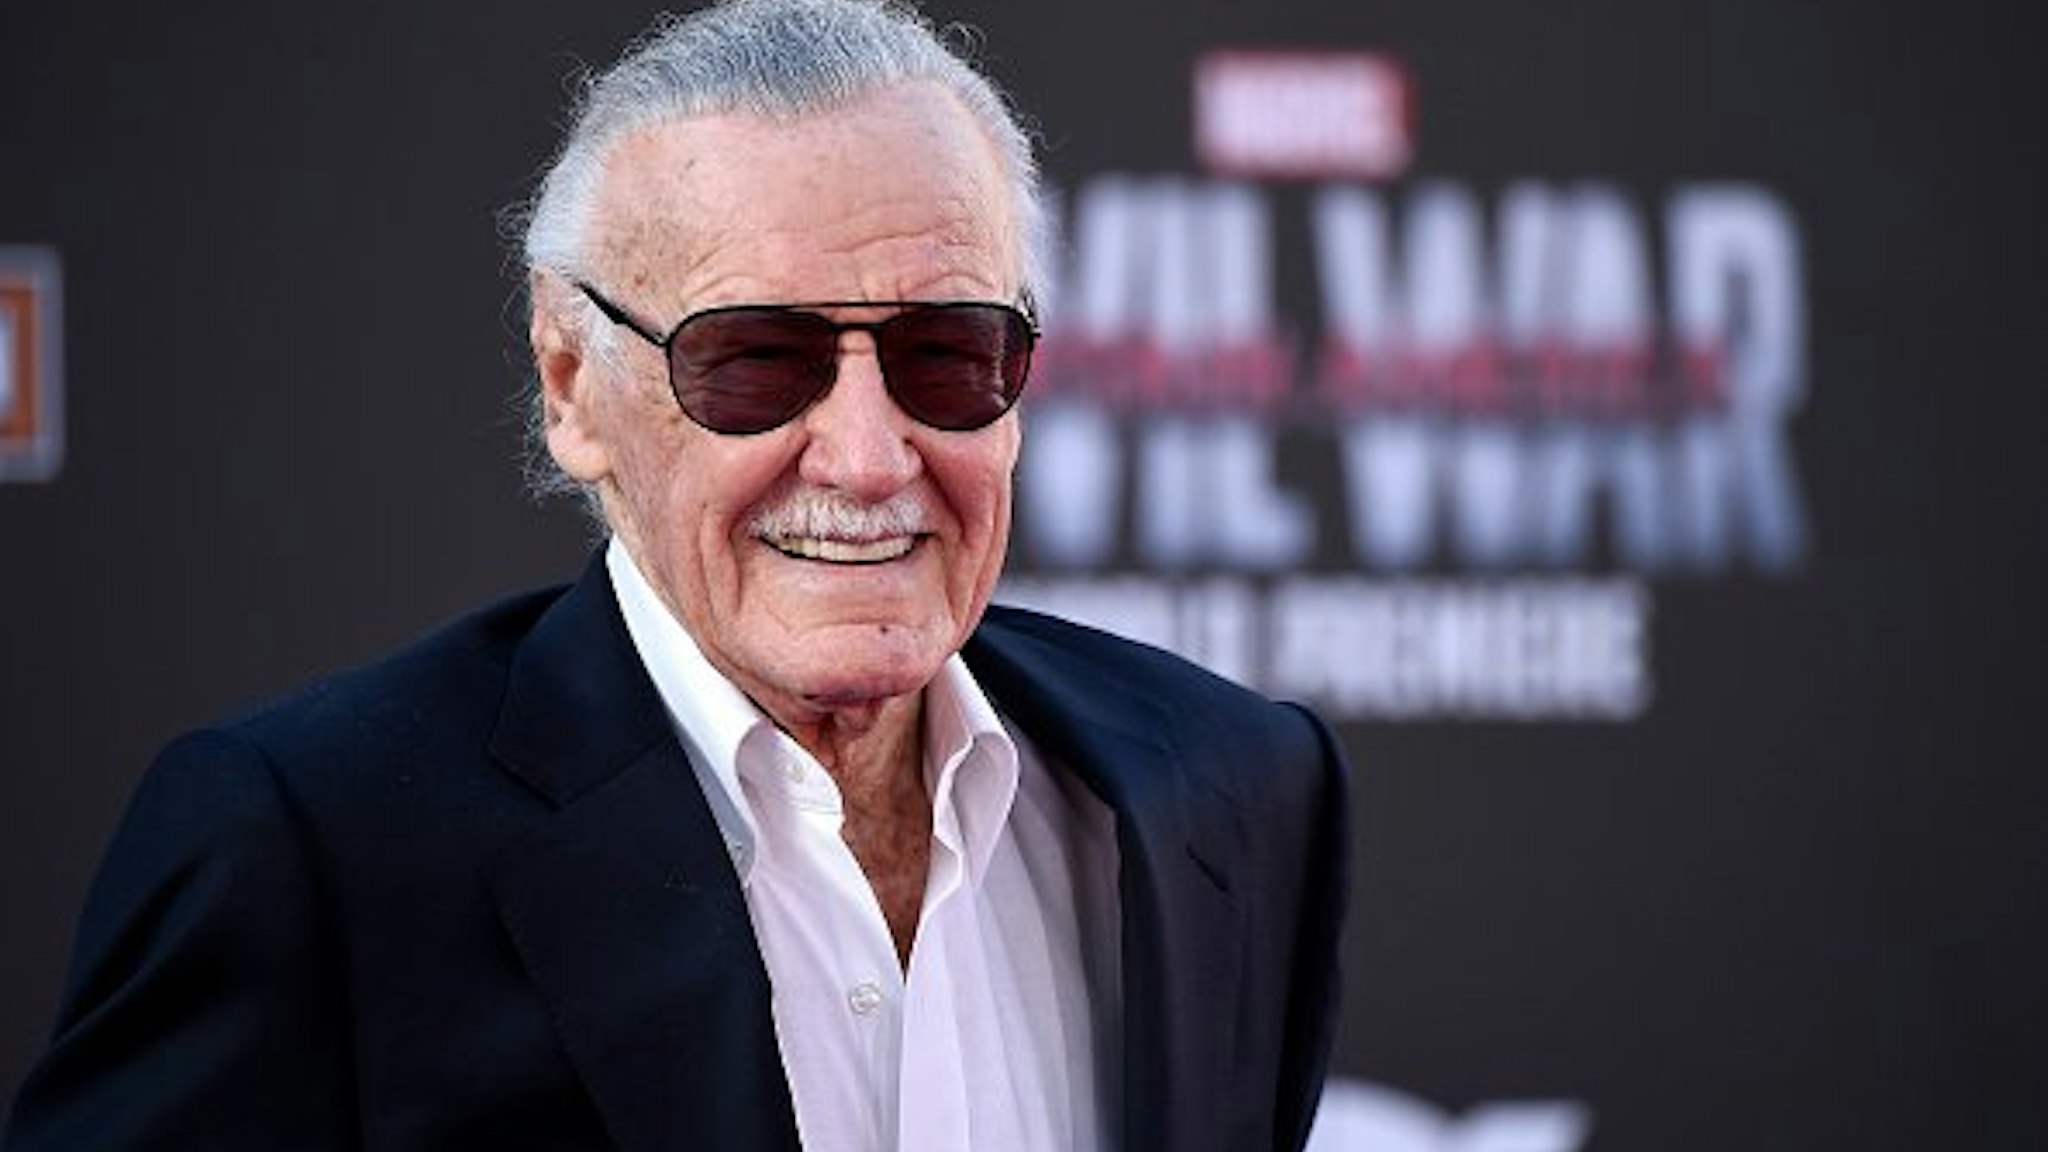 Stan Lee attends the premiere of Marvel's "Captain America: Civil War" at Dolby Theatre on April 12, 2016 in Los Angeles, California.